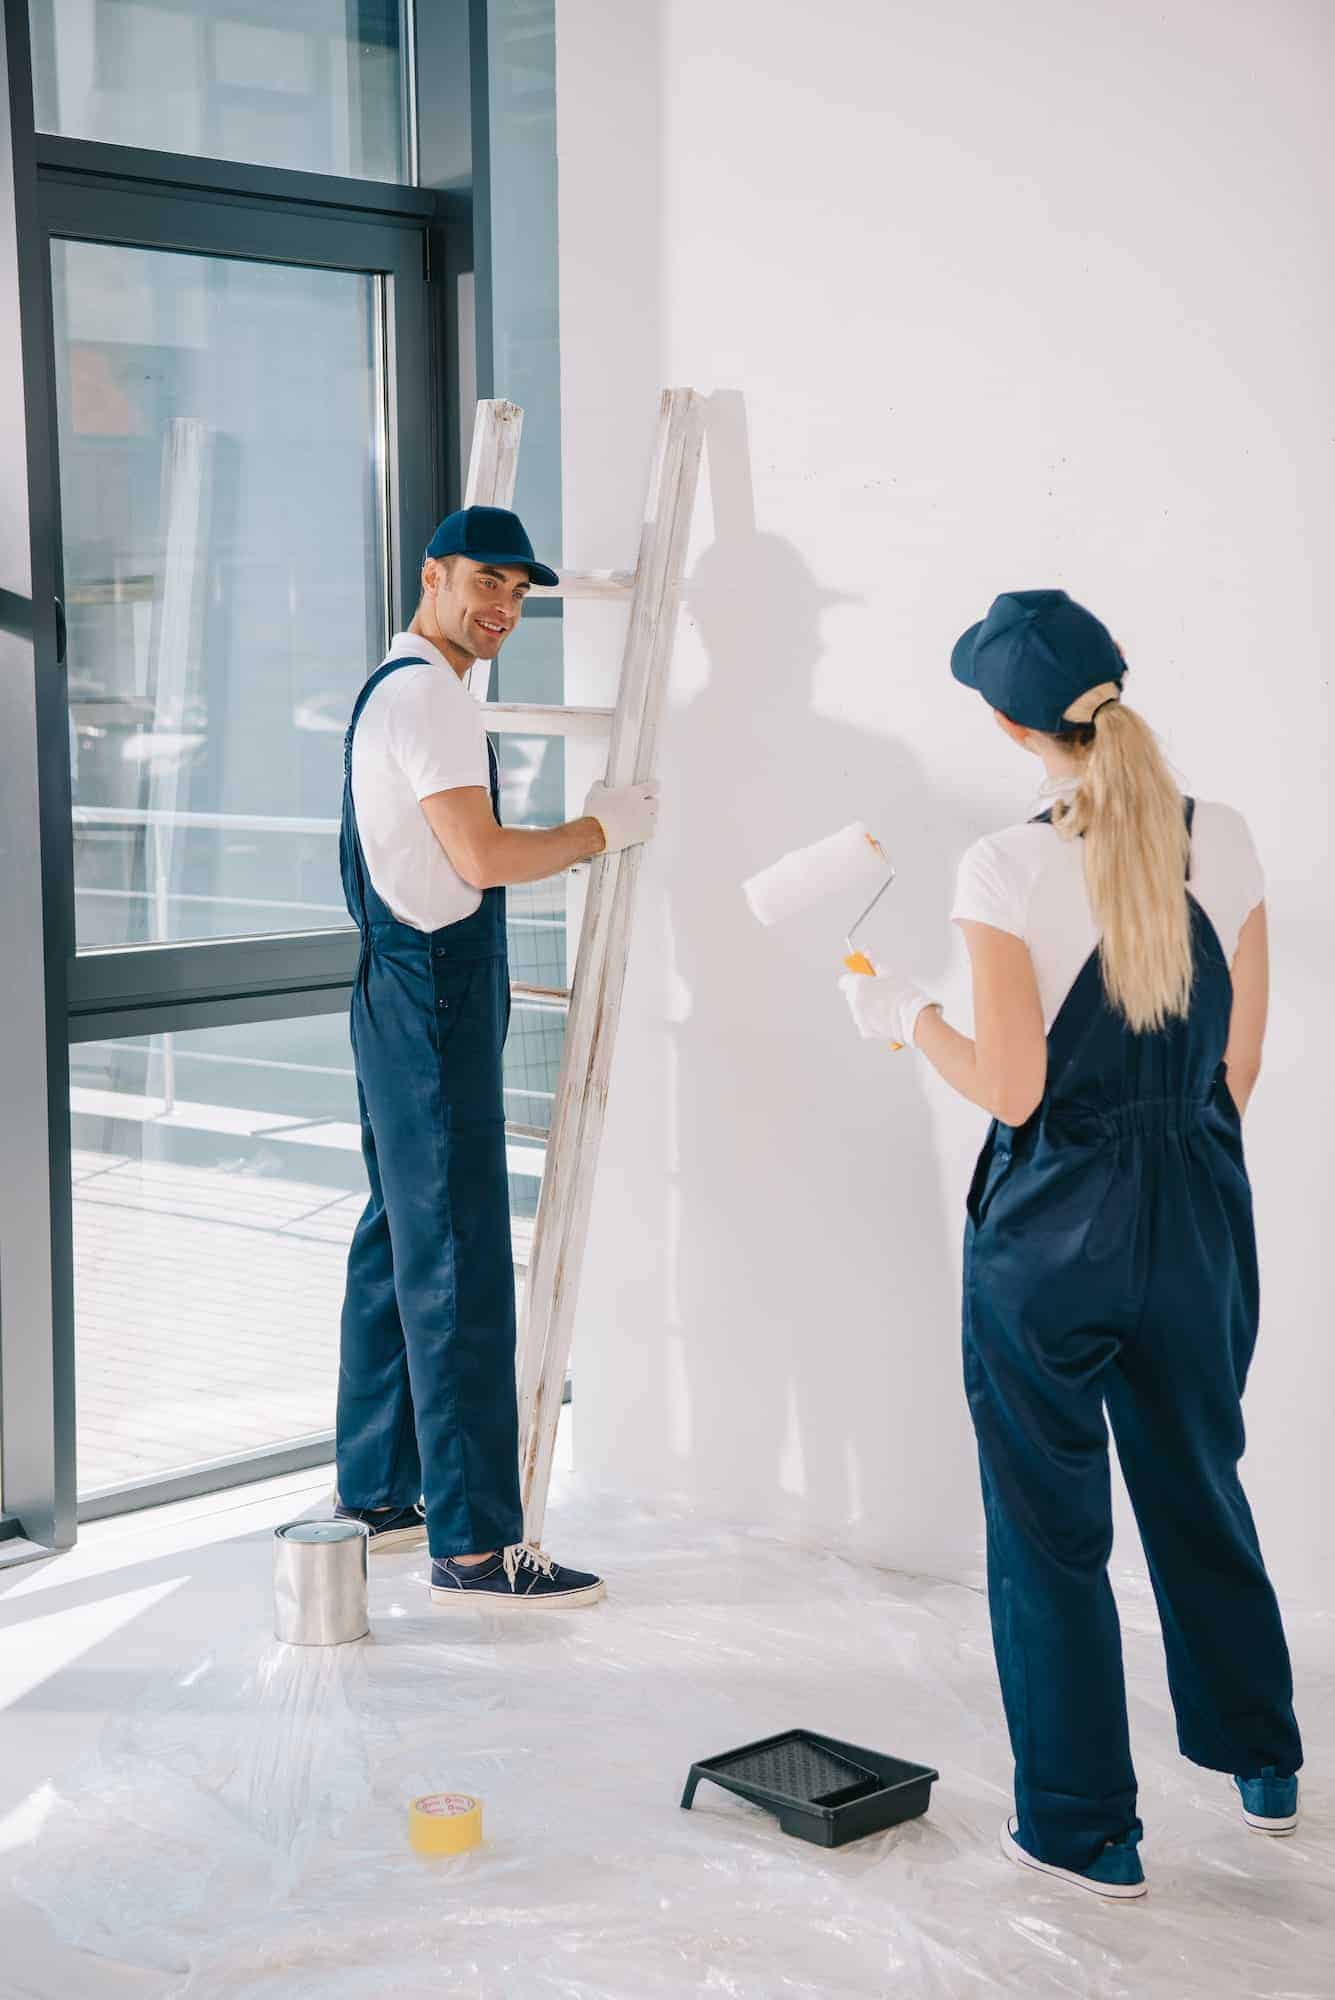 Rockland County Commercial Painters